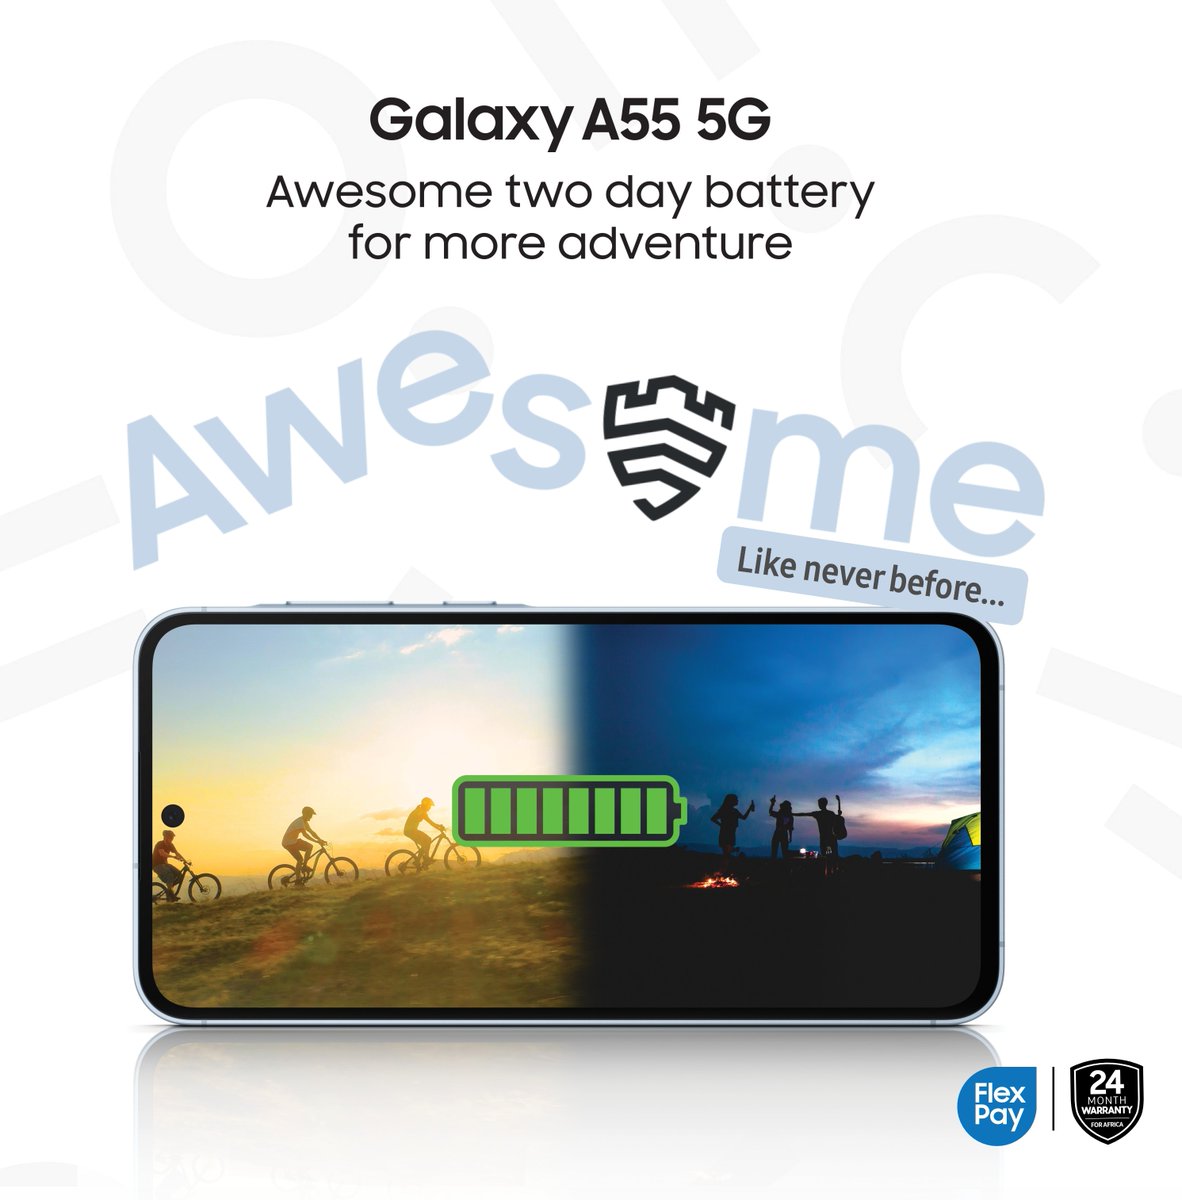 Enjoy continuous excitement with the #AwesomeLikeNeverBefore  5,000mAh battery capacity of Galaxy A55 5G.

#GalaxyA55 5G
#AwesomeLikeNeverBefore
#SamsungNigeria